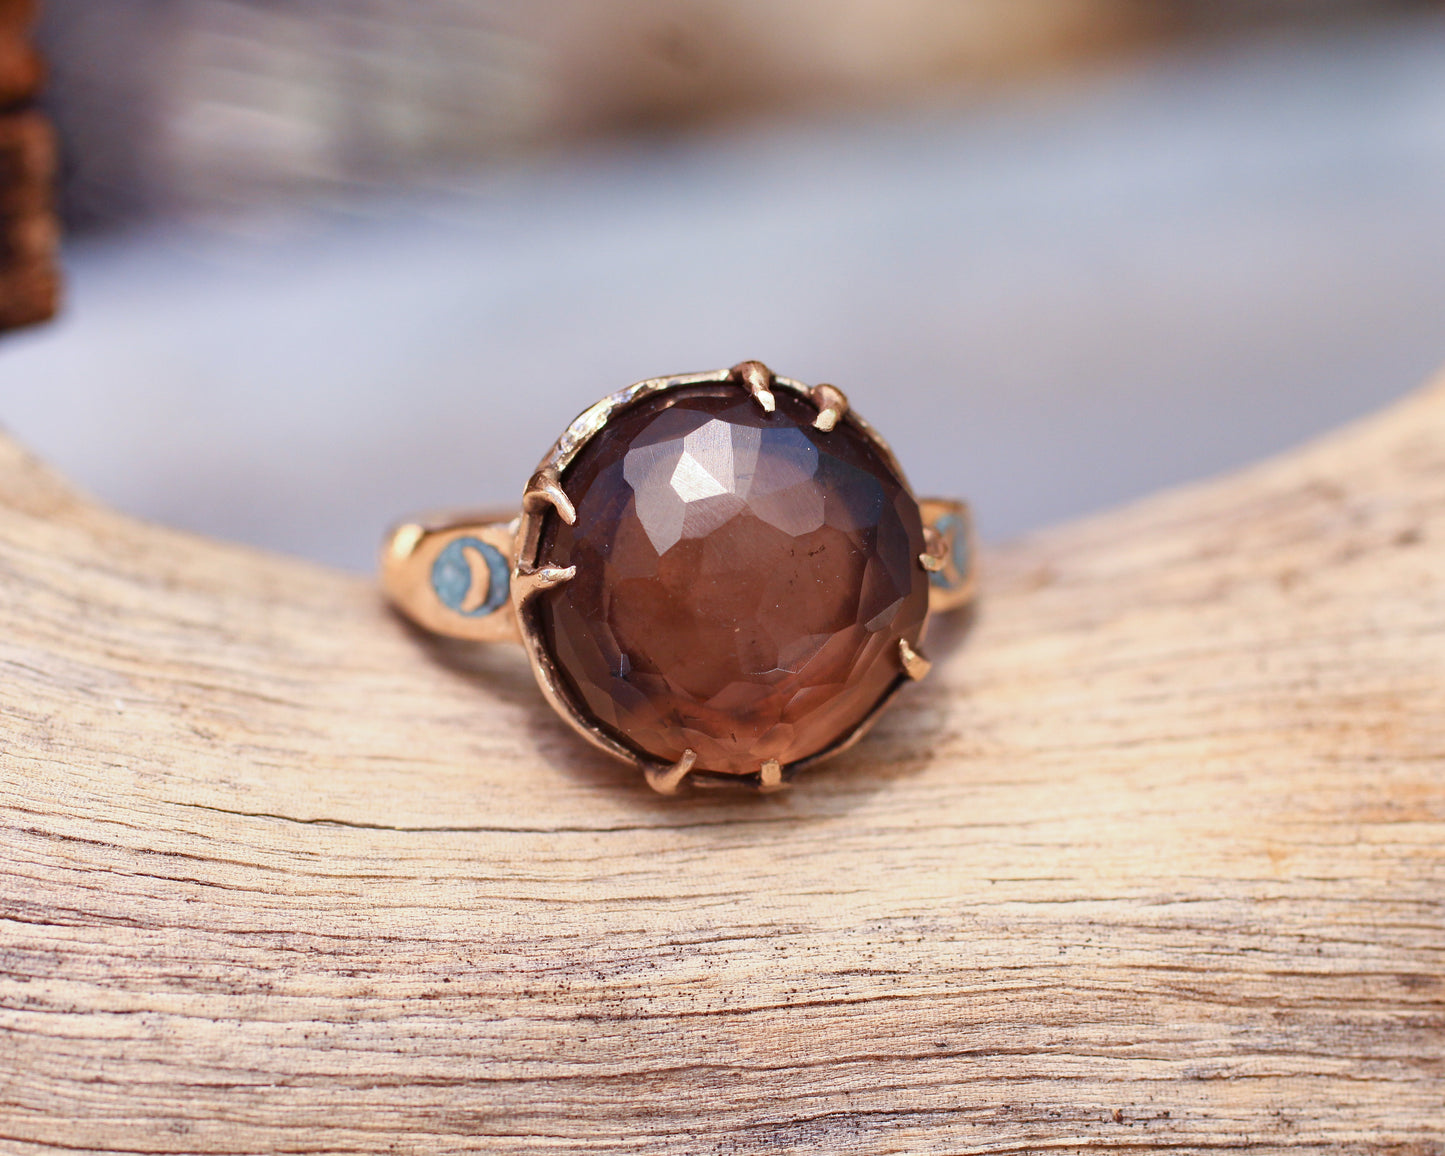 Hand Faceted Smoky Quartz and inlaid Turquoise moon ring - Size 8.25